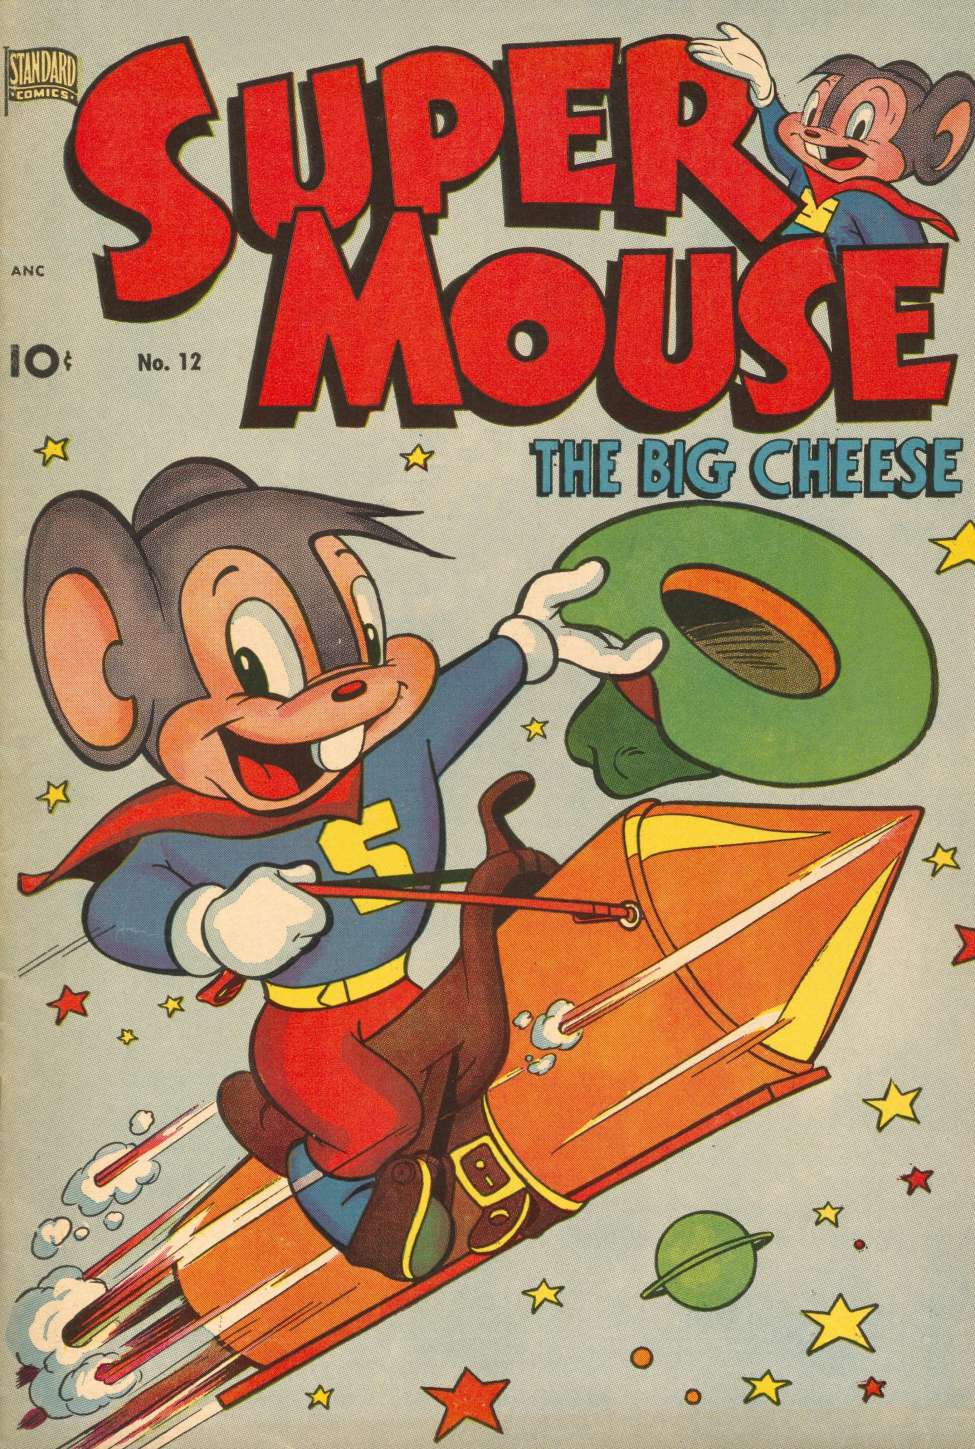 Book Cover For Supermouse 12 - Version 2